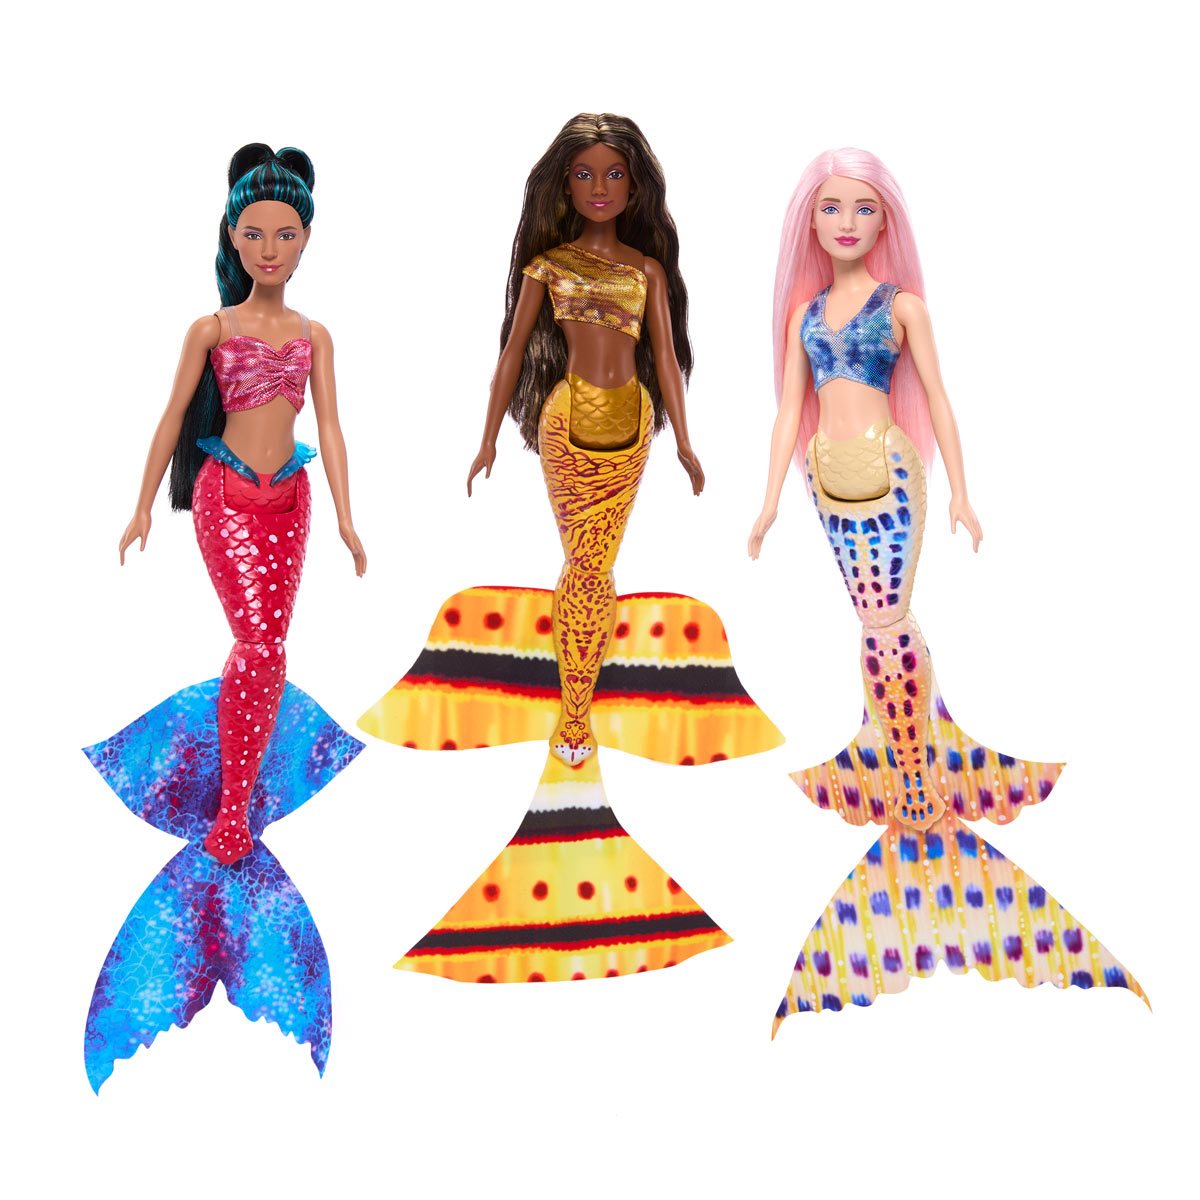 Little Mermaid live action small dolls figure collection from